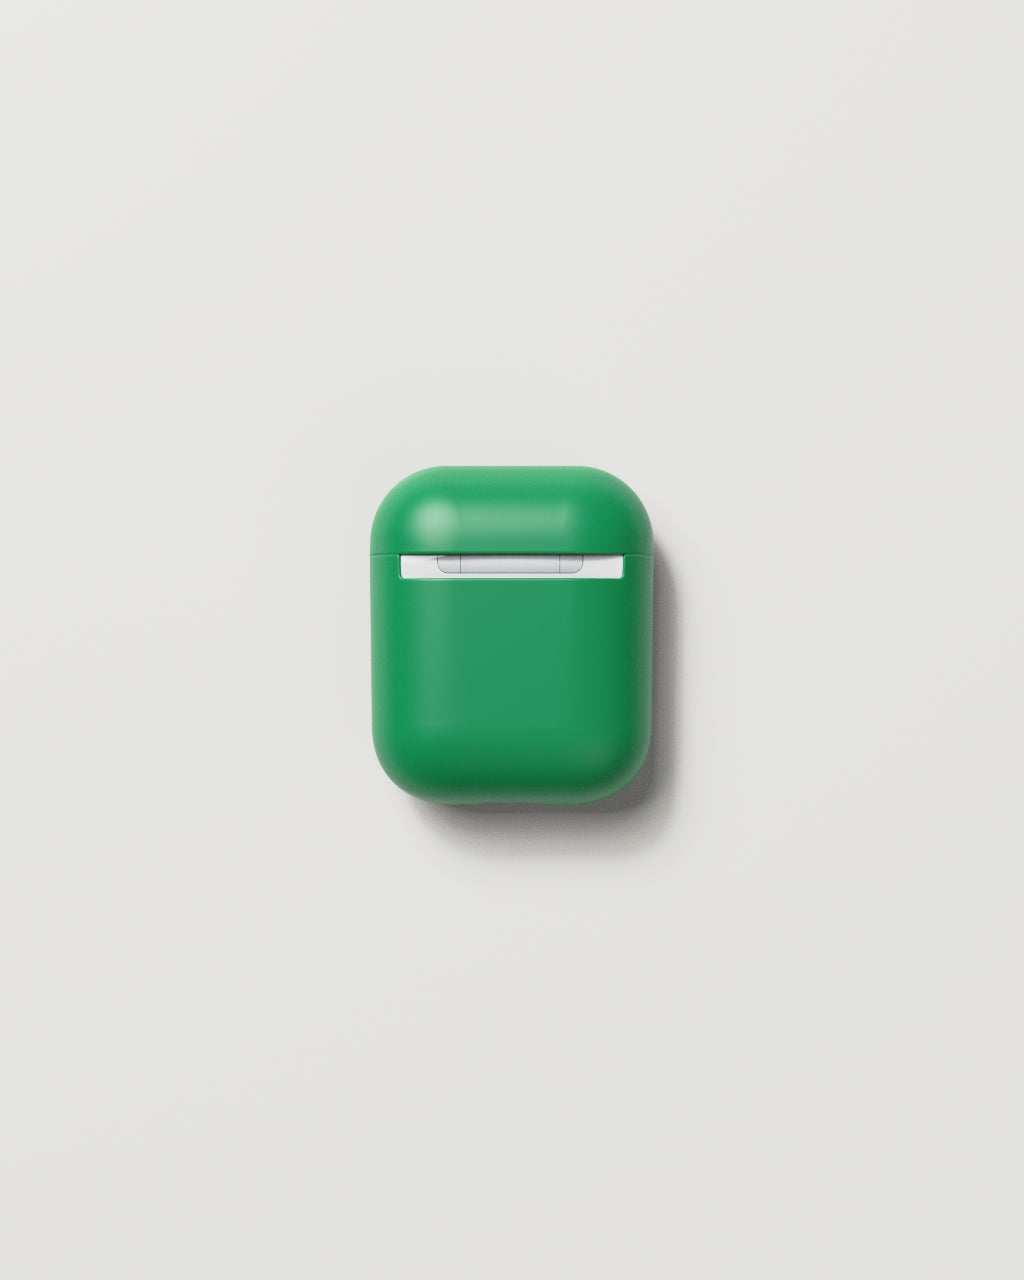 Thin AirPods Case